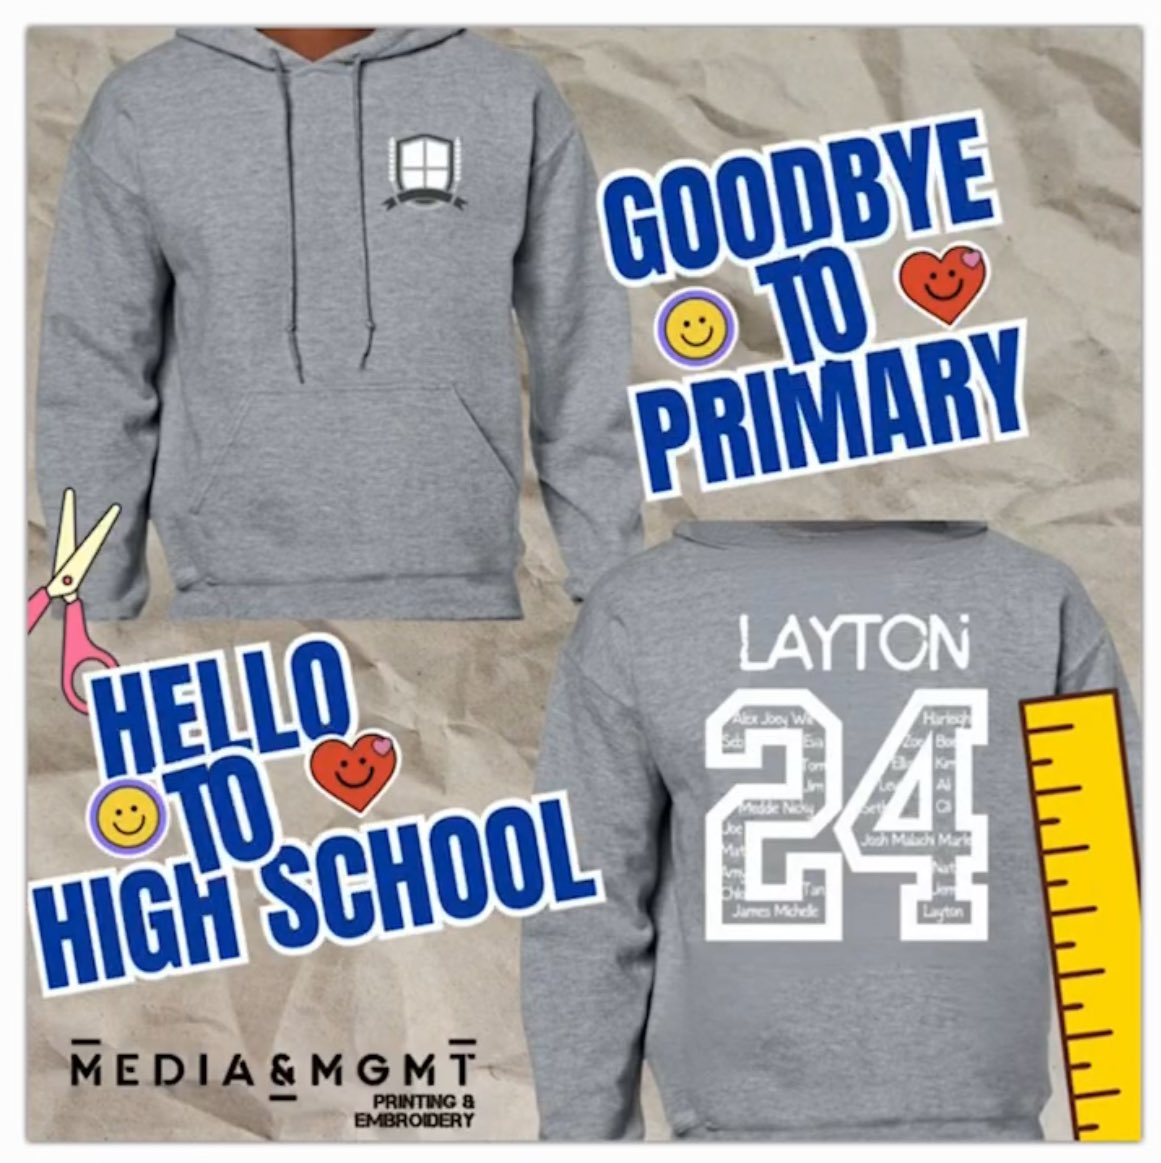 Got school leavers on your hands?? It’s time to sort out Leavers Hoodies! A hoodie is the school leavers keepsake to mark the end of an era 🙌🏽 We supply & print your hoodies/ t-shirts your spec, colour & include the school logo. #schoolleavers #leavershoodies #endofanera